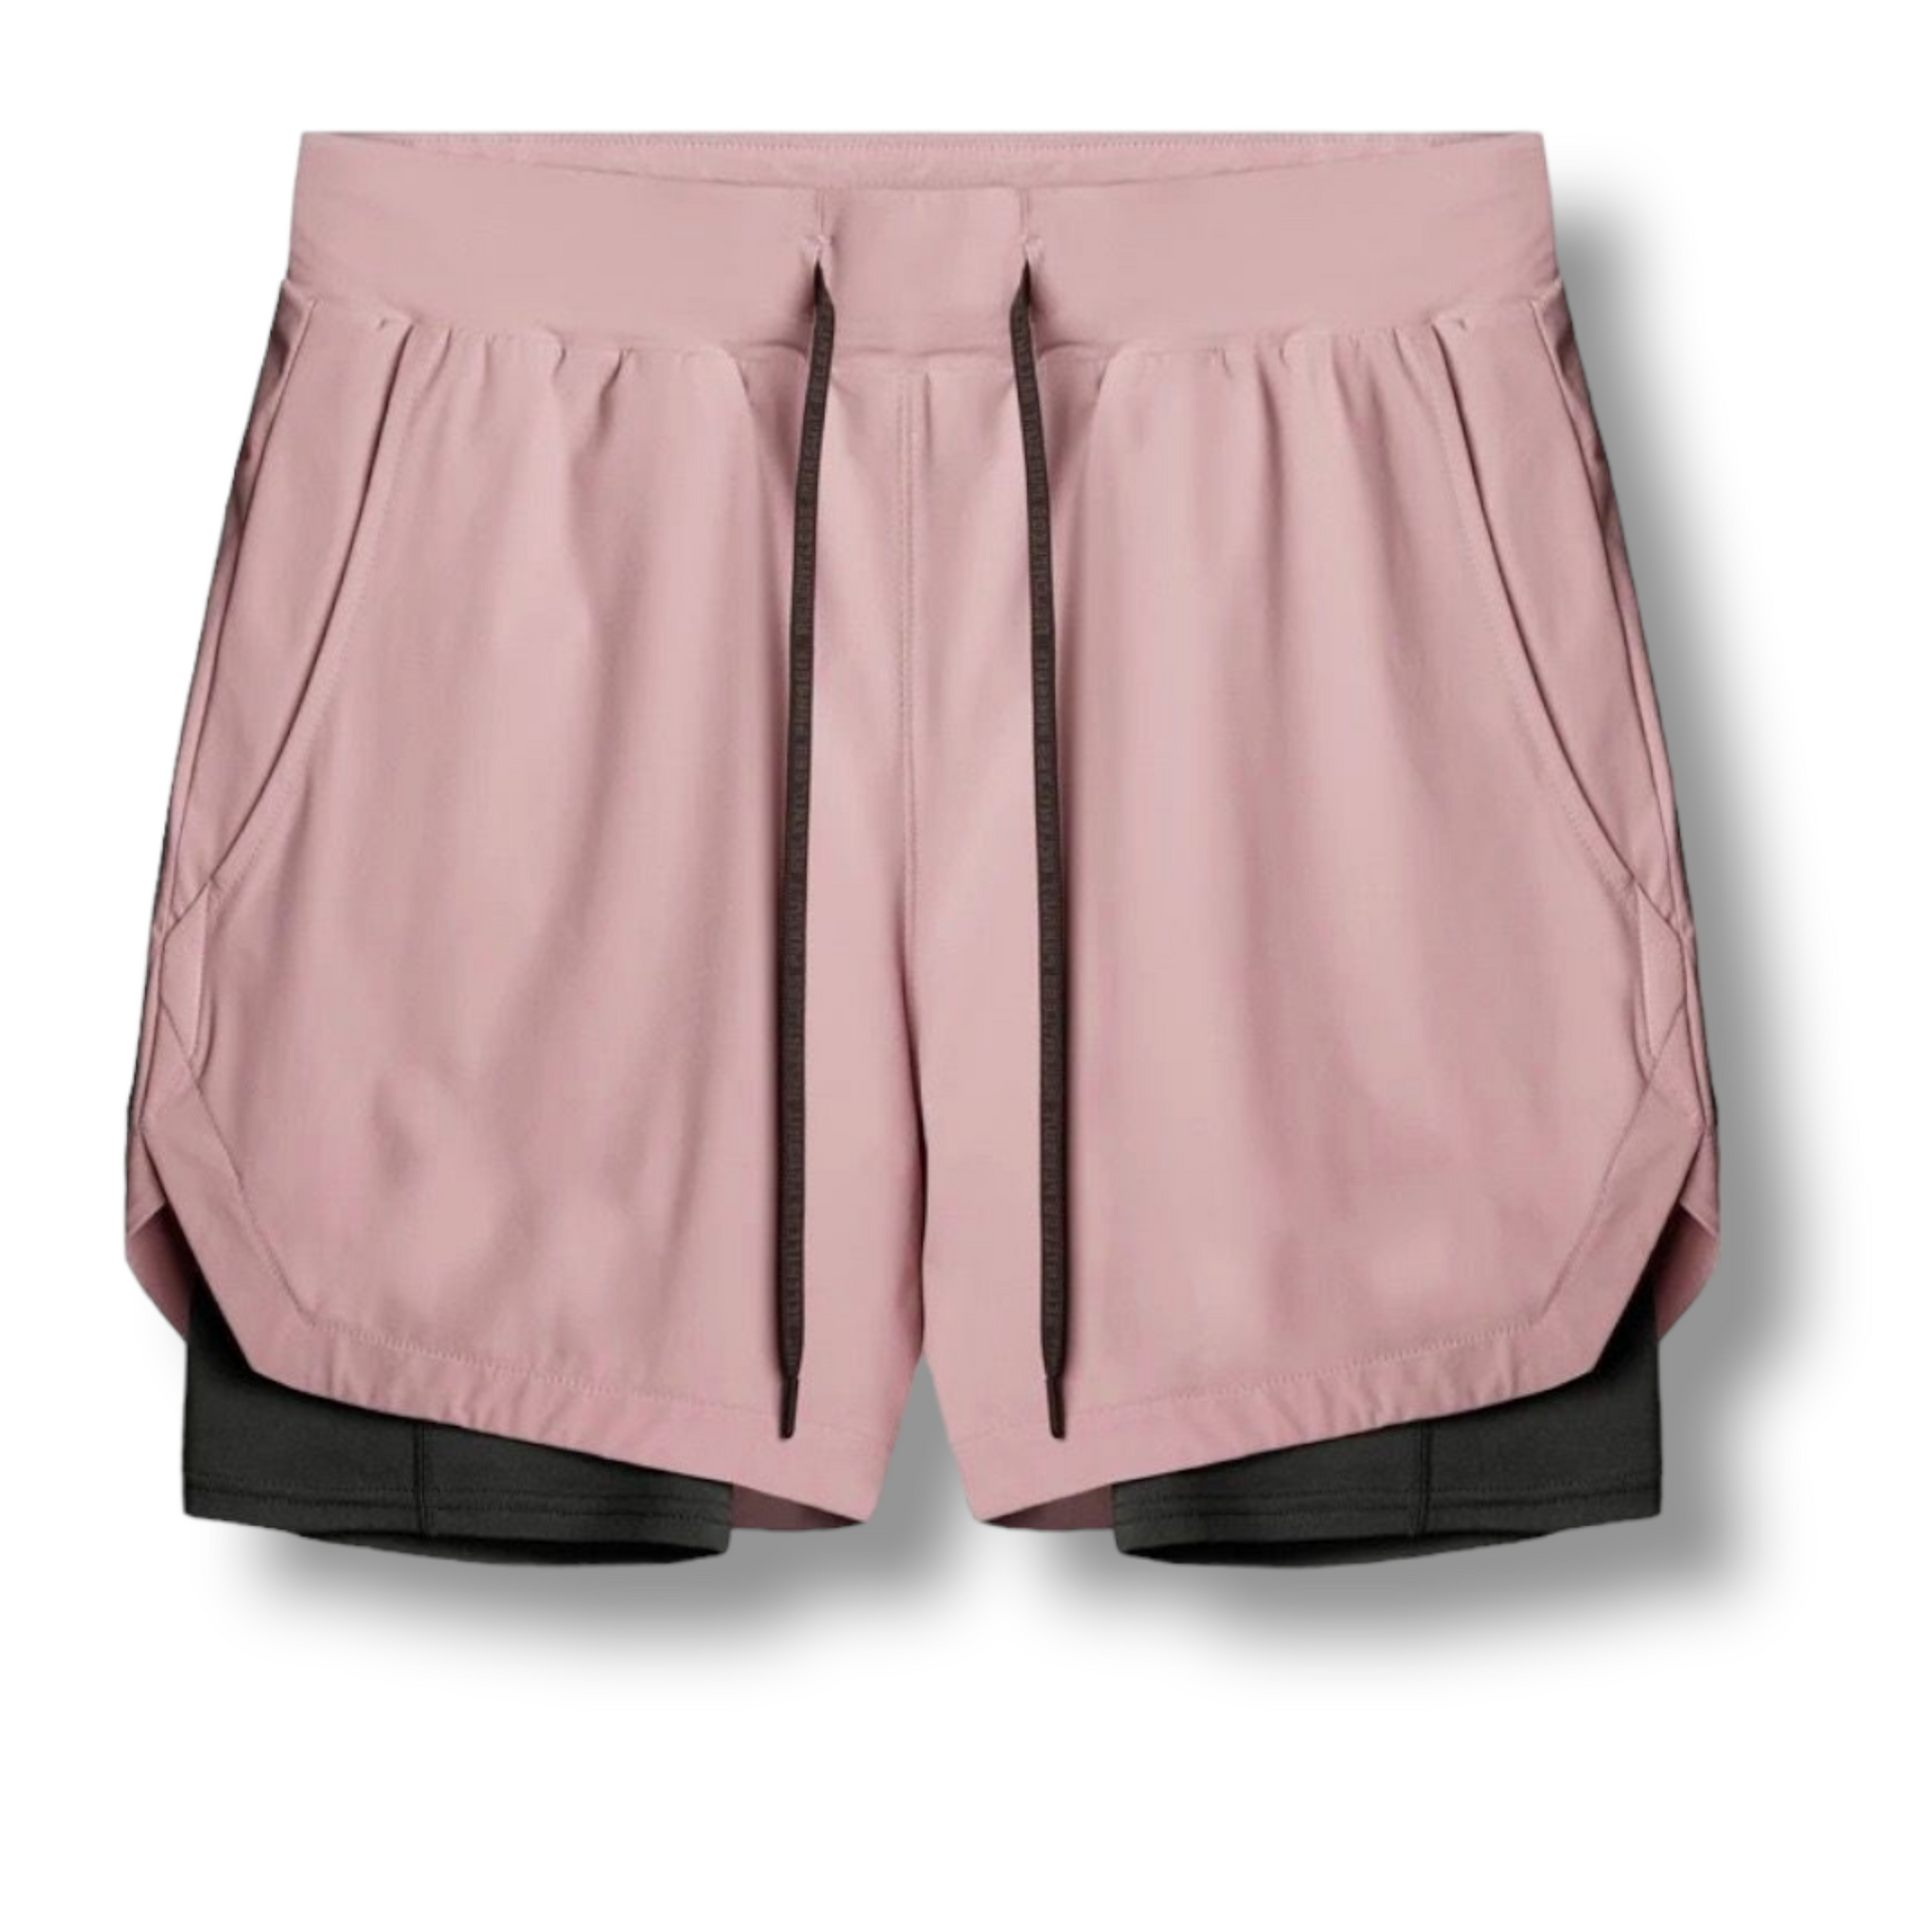 a pair of pink elijah gym shorts on a white background